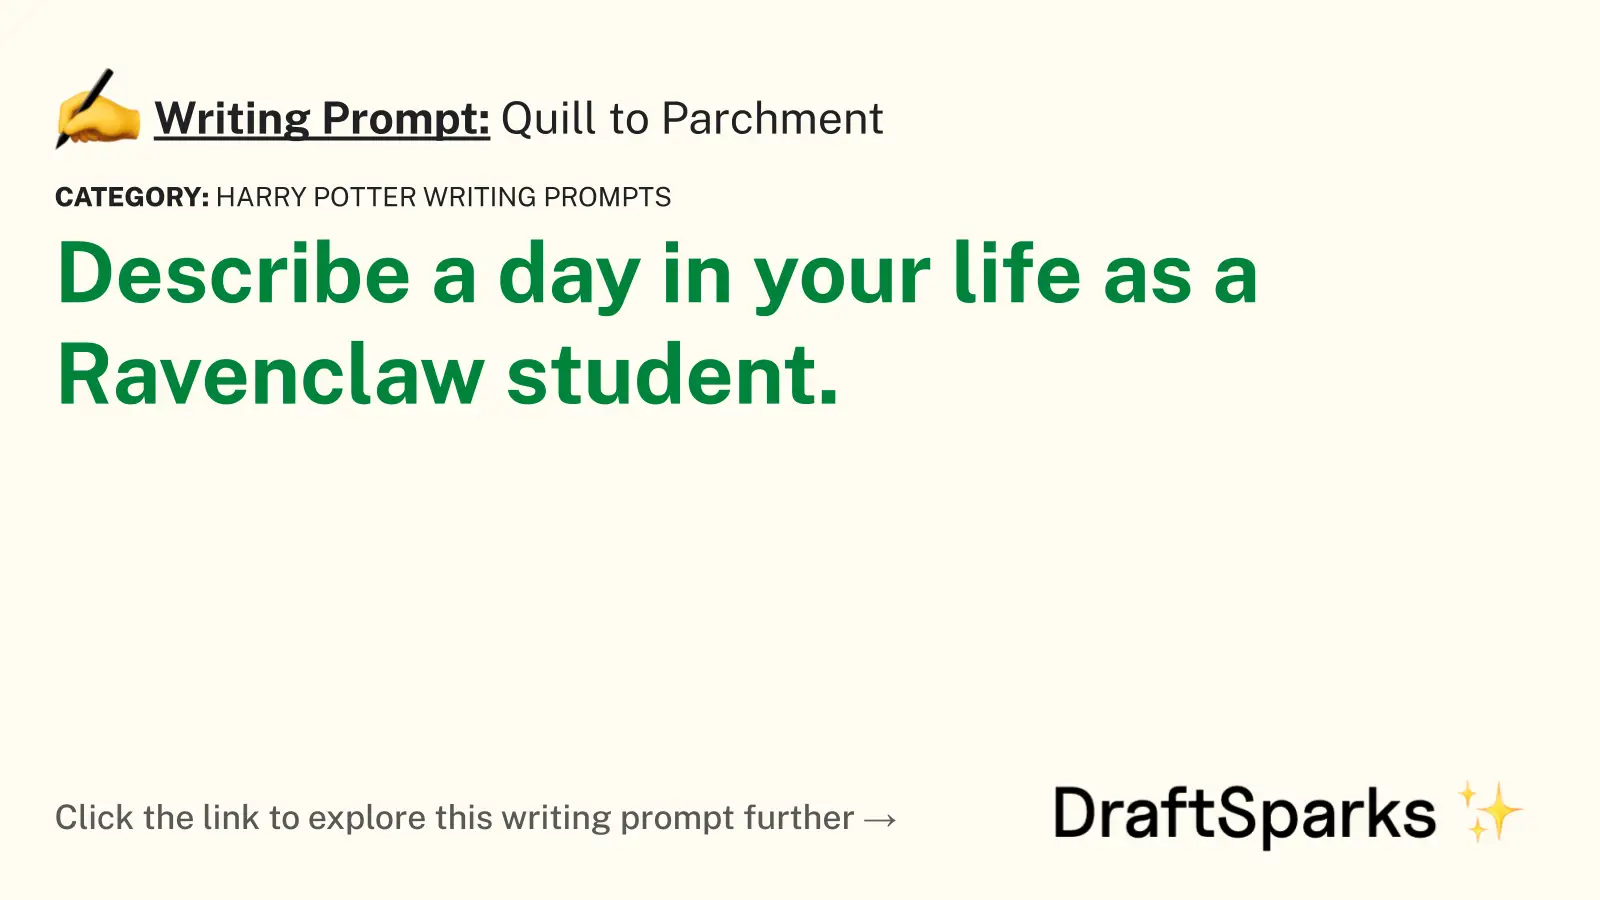 Quill to Parchment